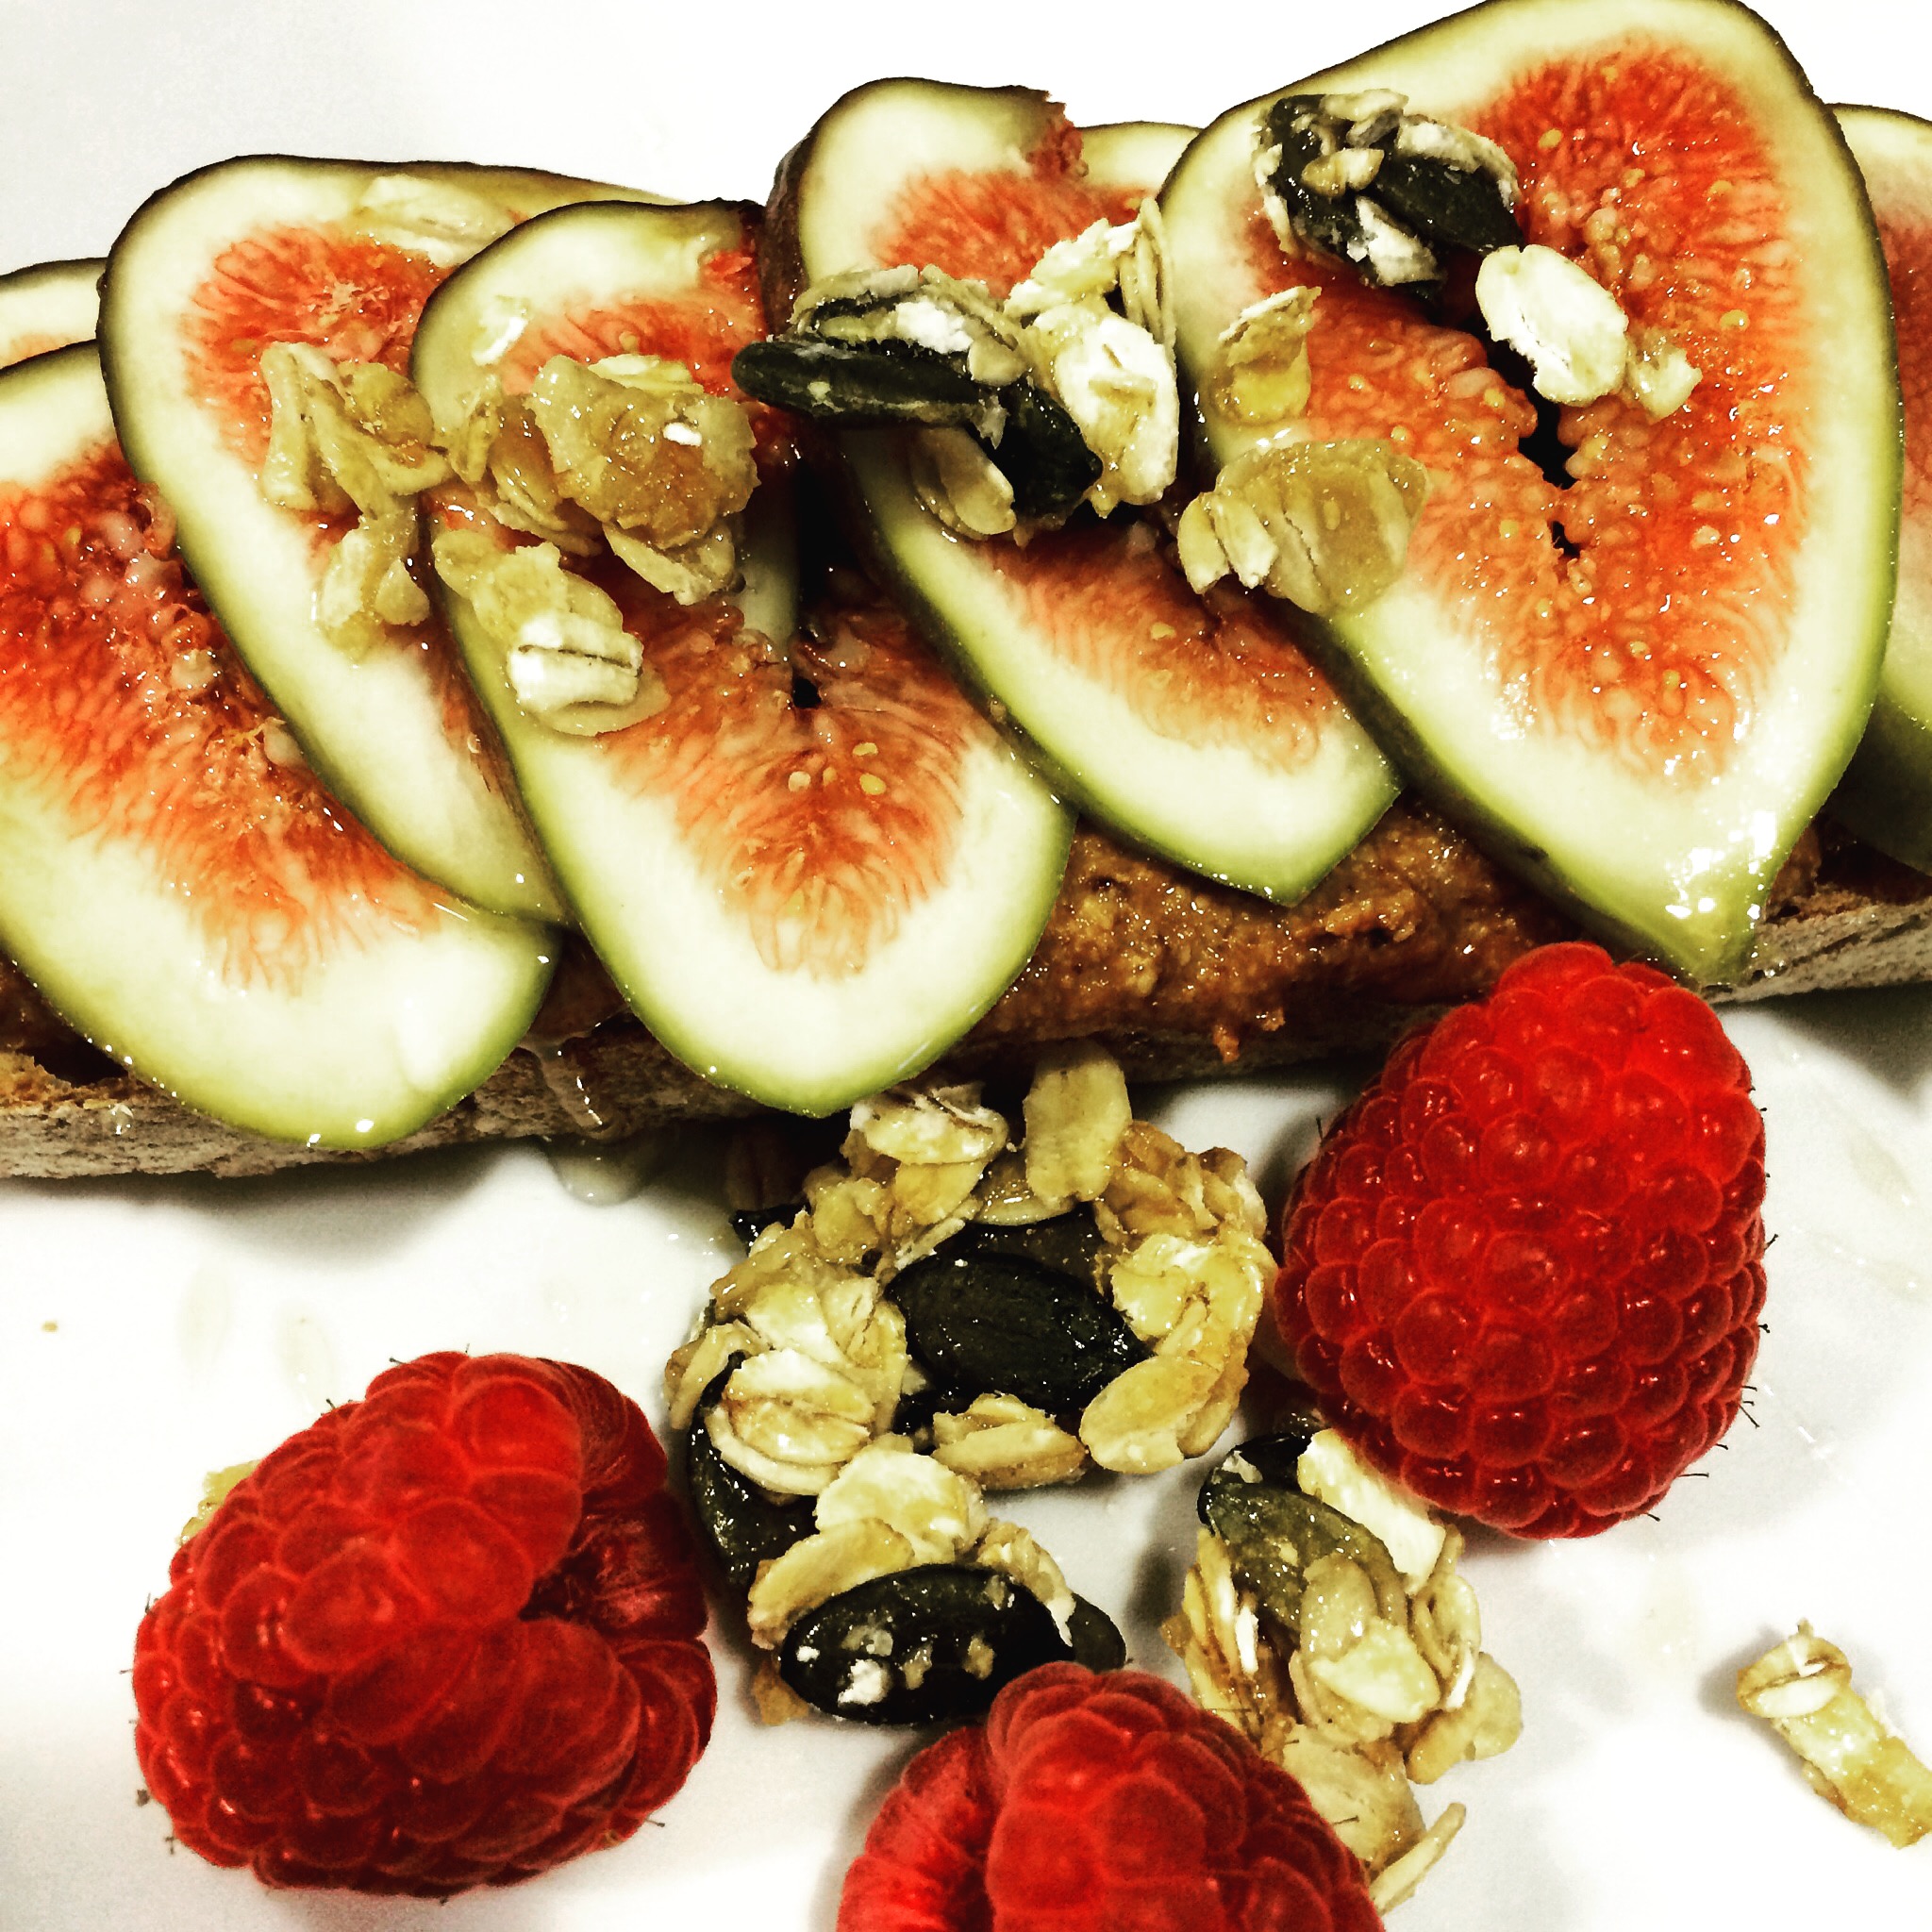 Homemade almond butter toast with fresh figs and granola